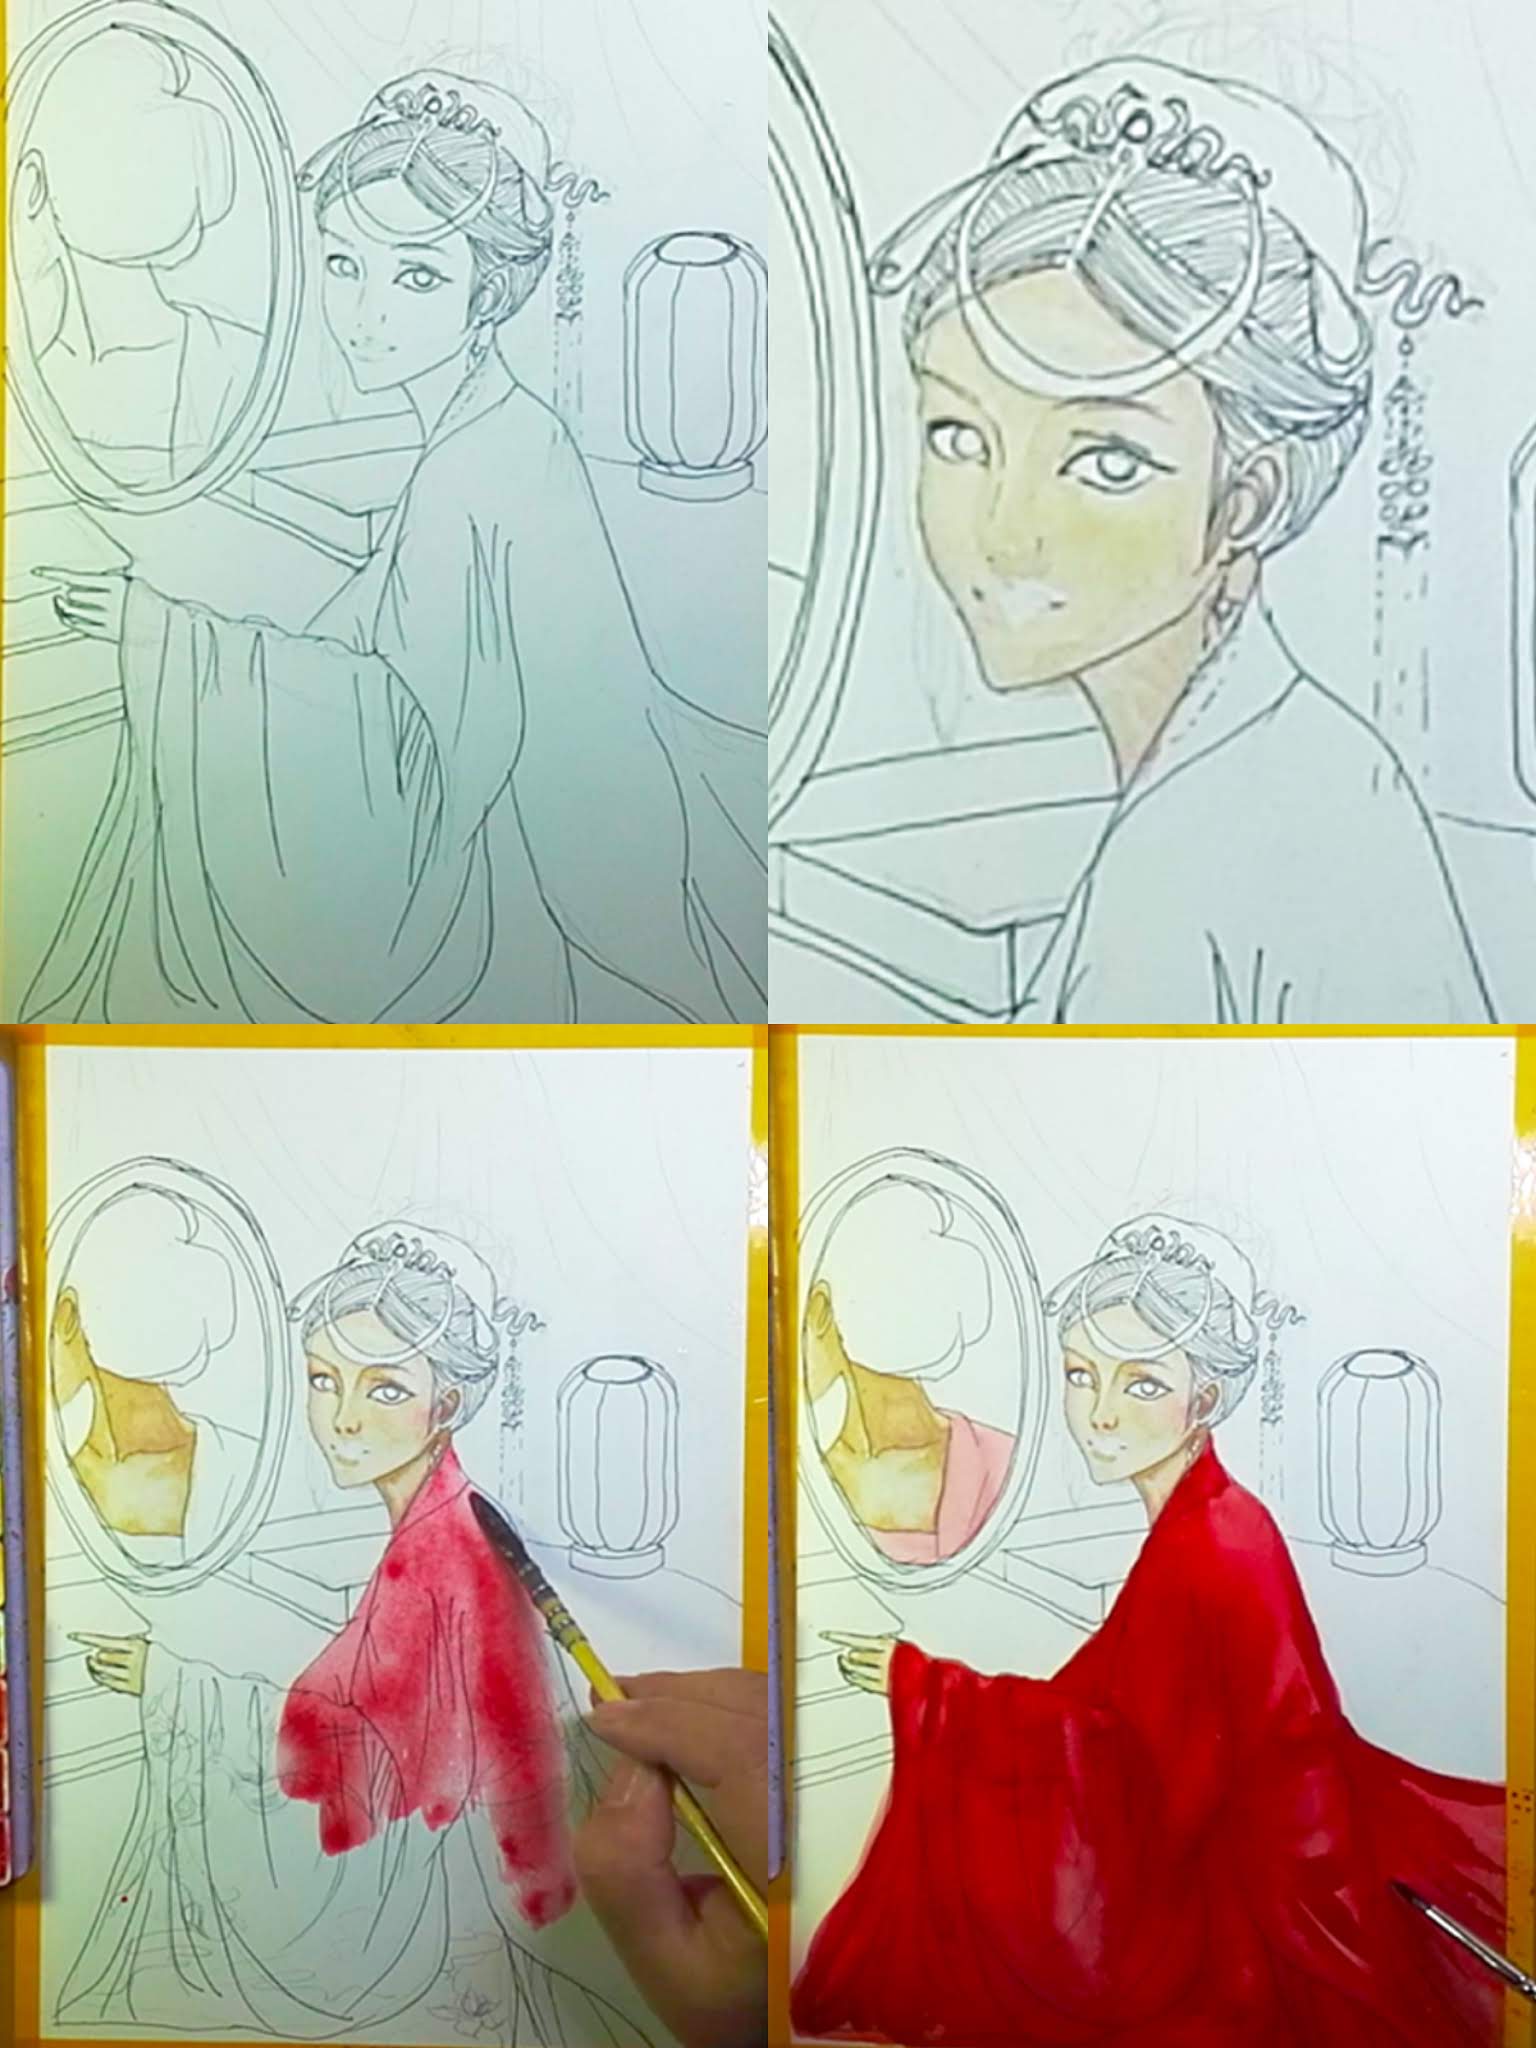 How to draw a red dress wedding girl with Watercolor step by step tutorial